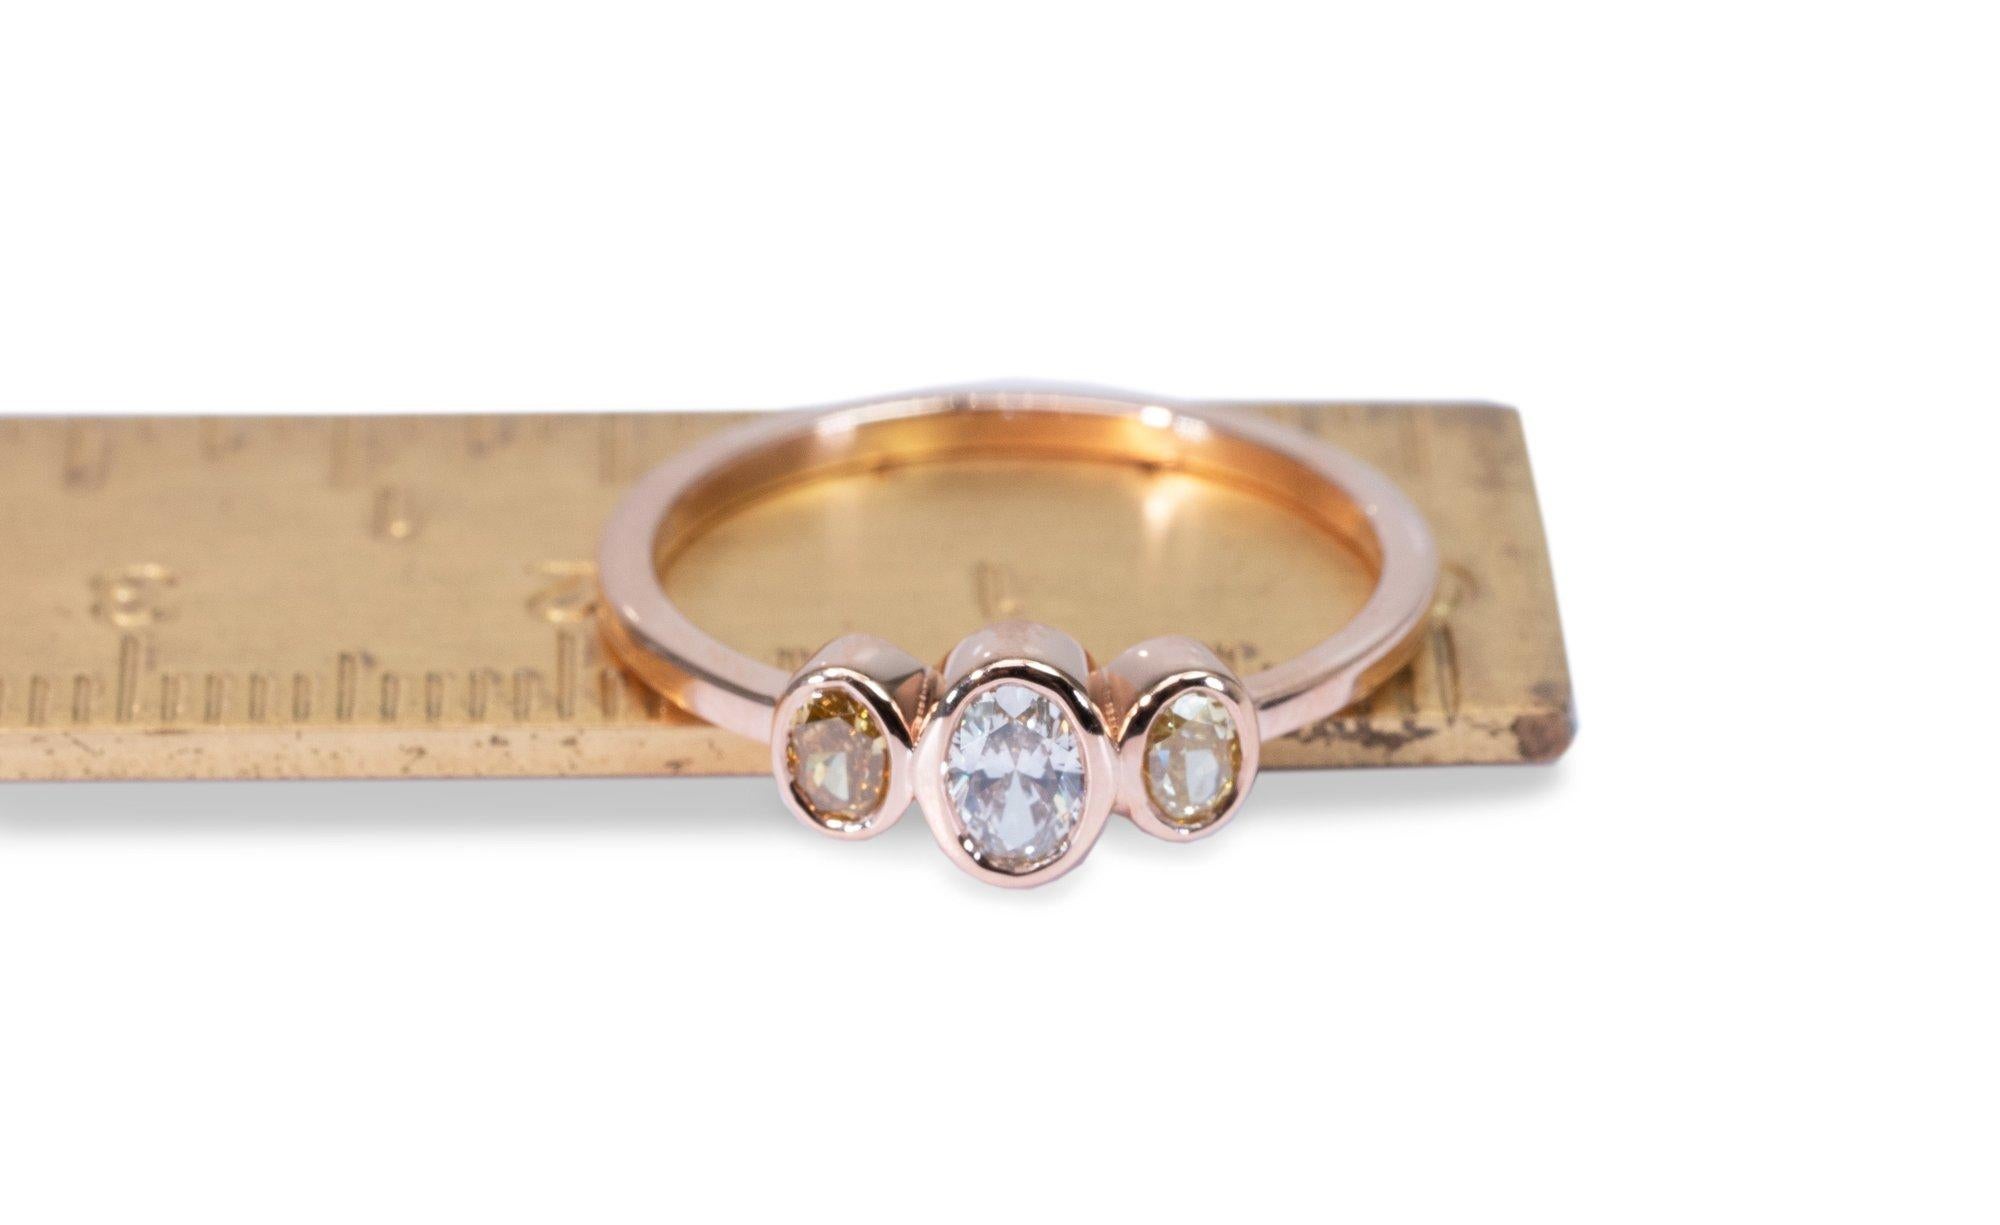 Women's Unique 18K Rose Gold 3 Stone Ring with 0.46 ct Natural Diamonds- AIG Certificate